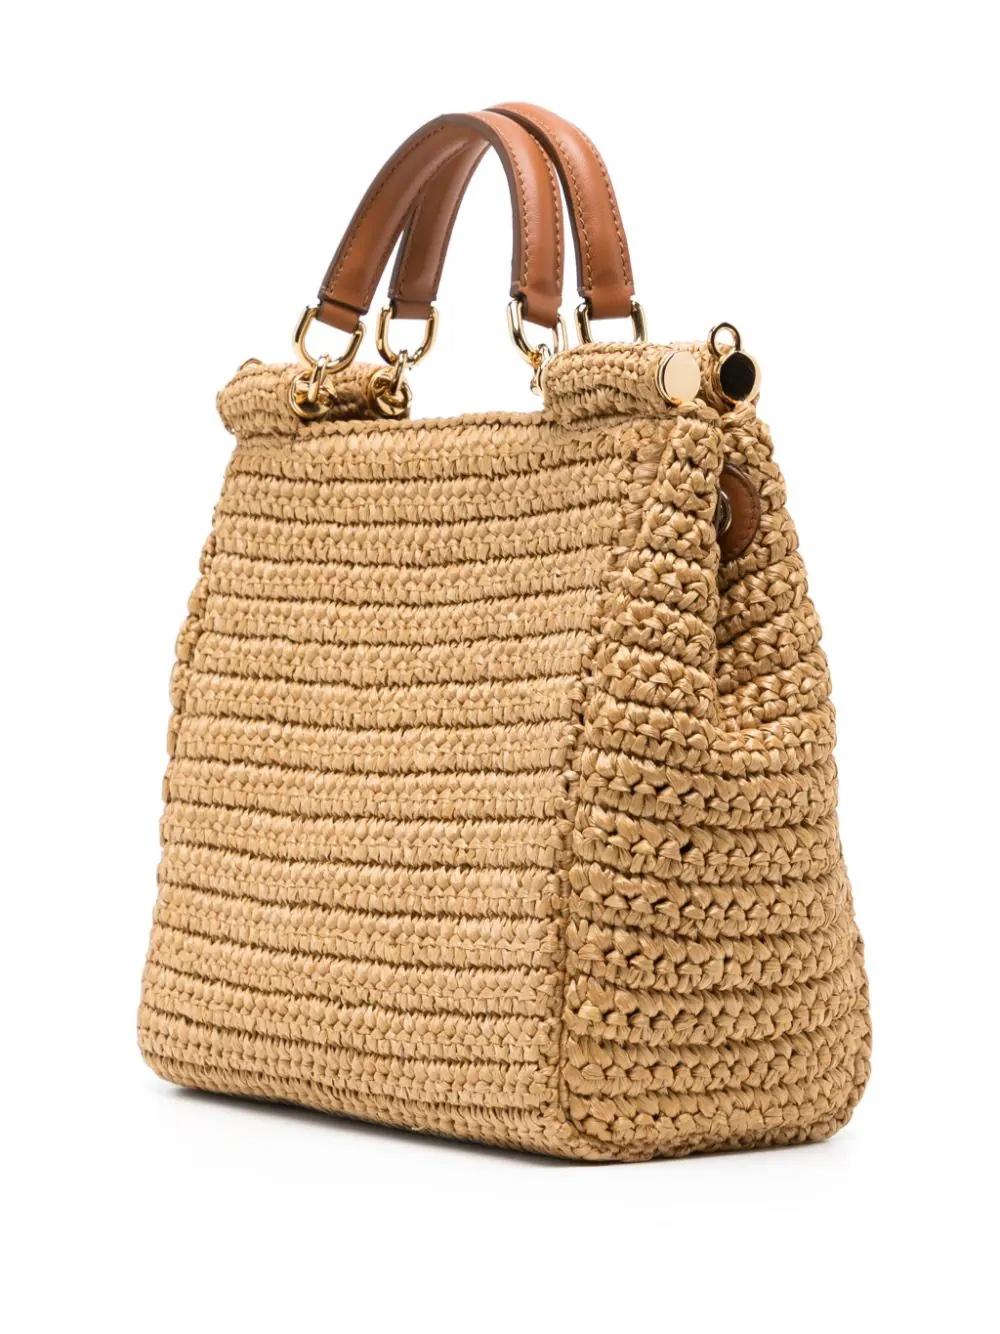 * Light brown
* Woven wicker design
* Leather trim
* Gold-tone logo plaque
* Two rolled top handles
* Magnetic fastening
* Main compartment
* Internal zip-fastening pocket
* Detachable shoulder strap
* Excellent Condition: This pre-owned item is in